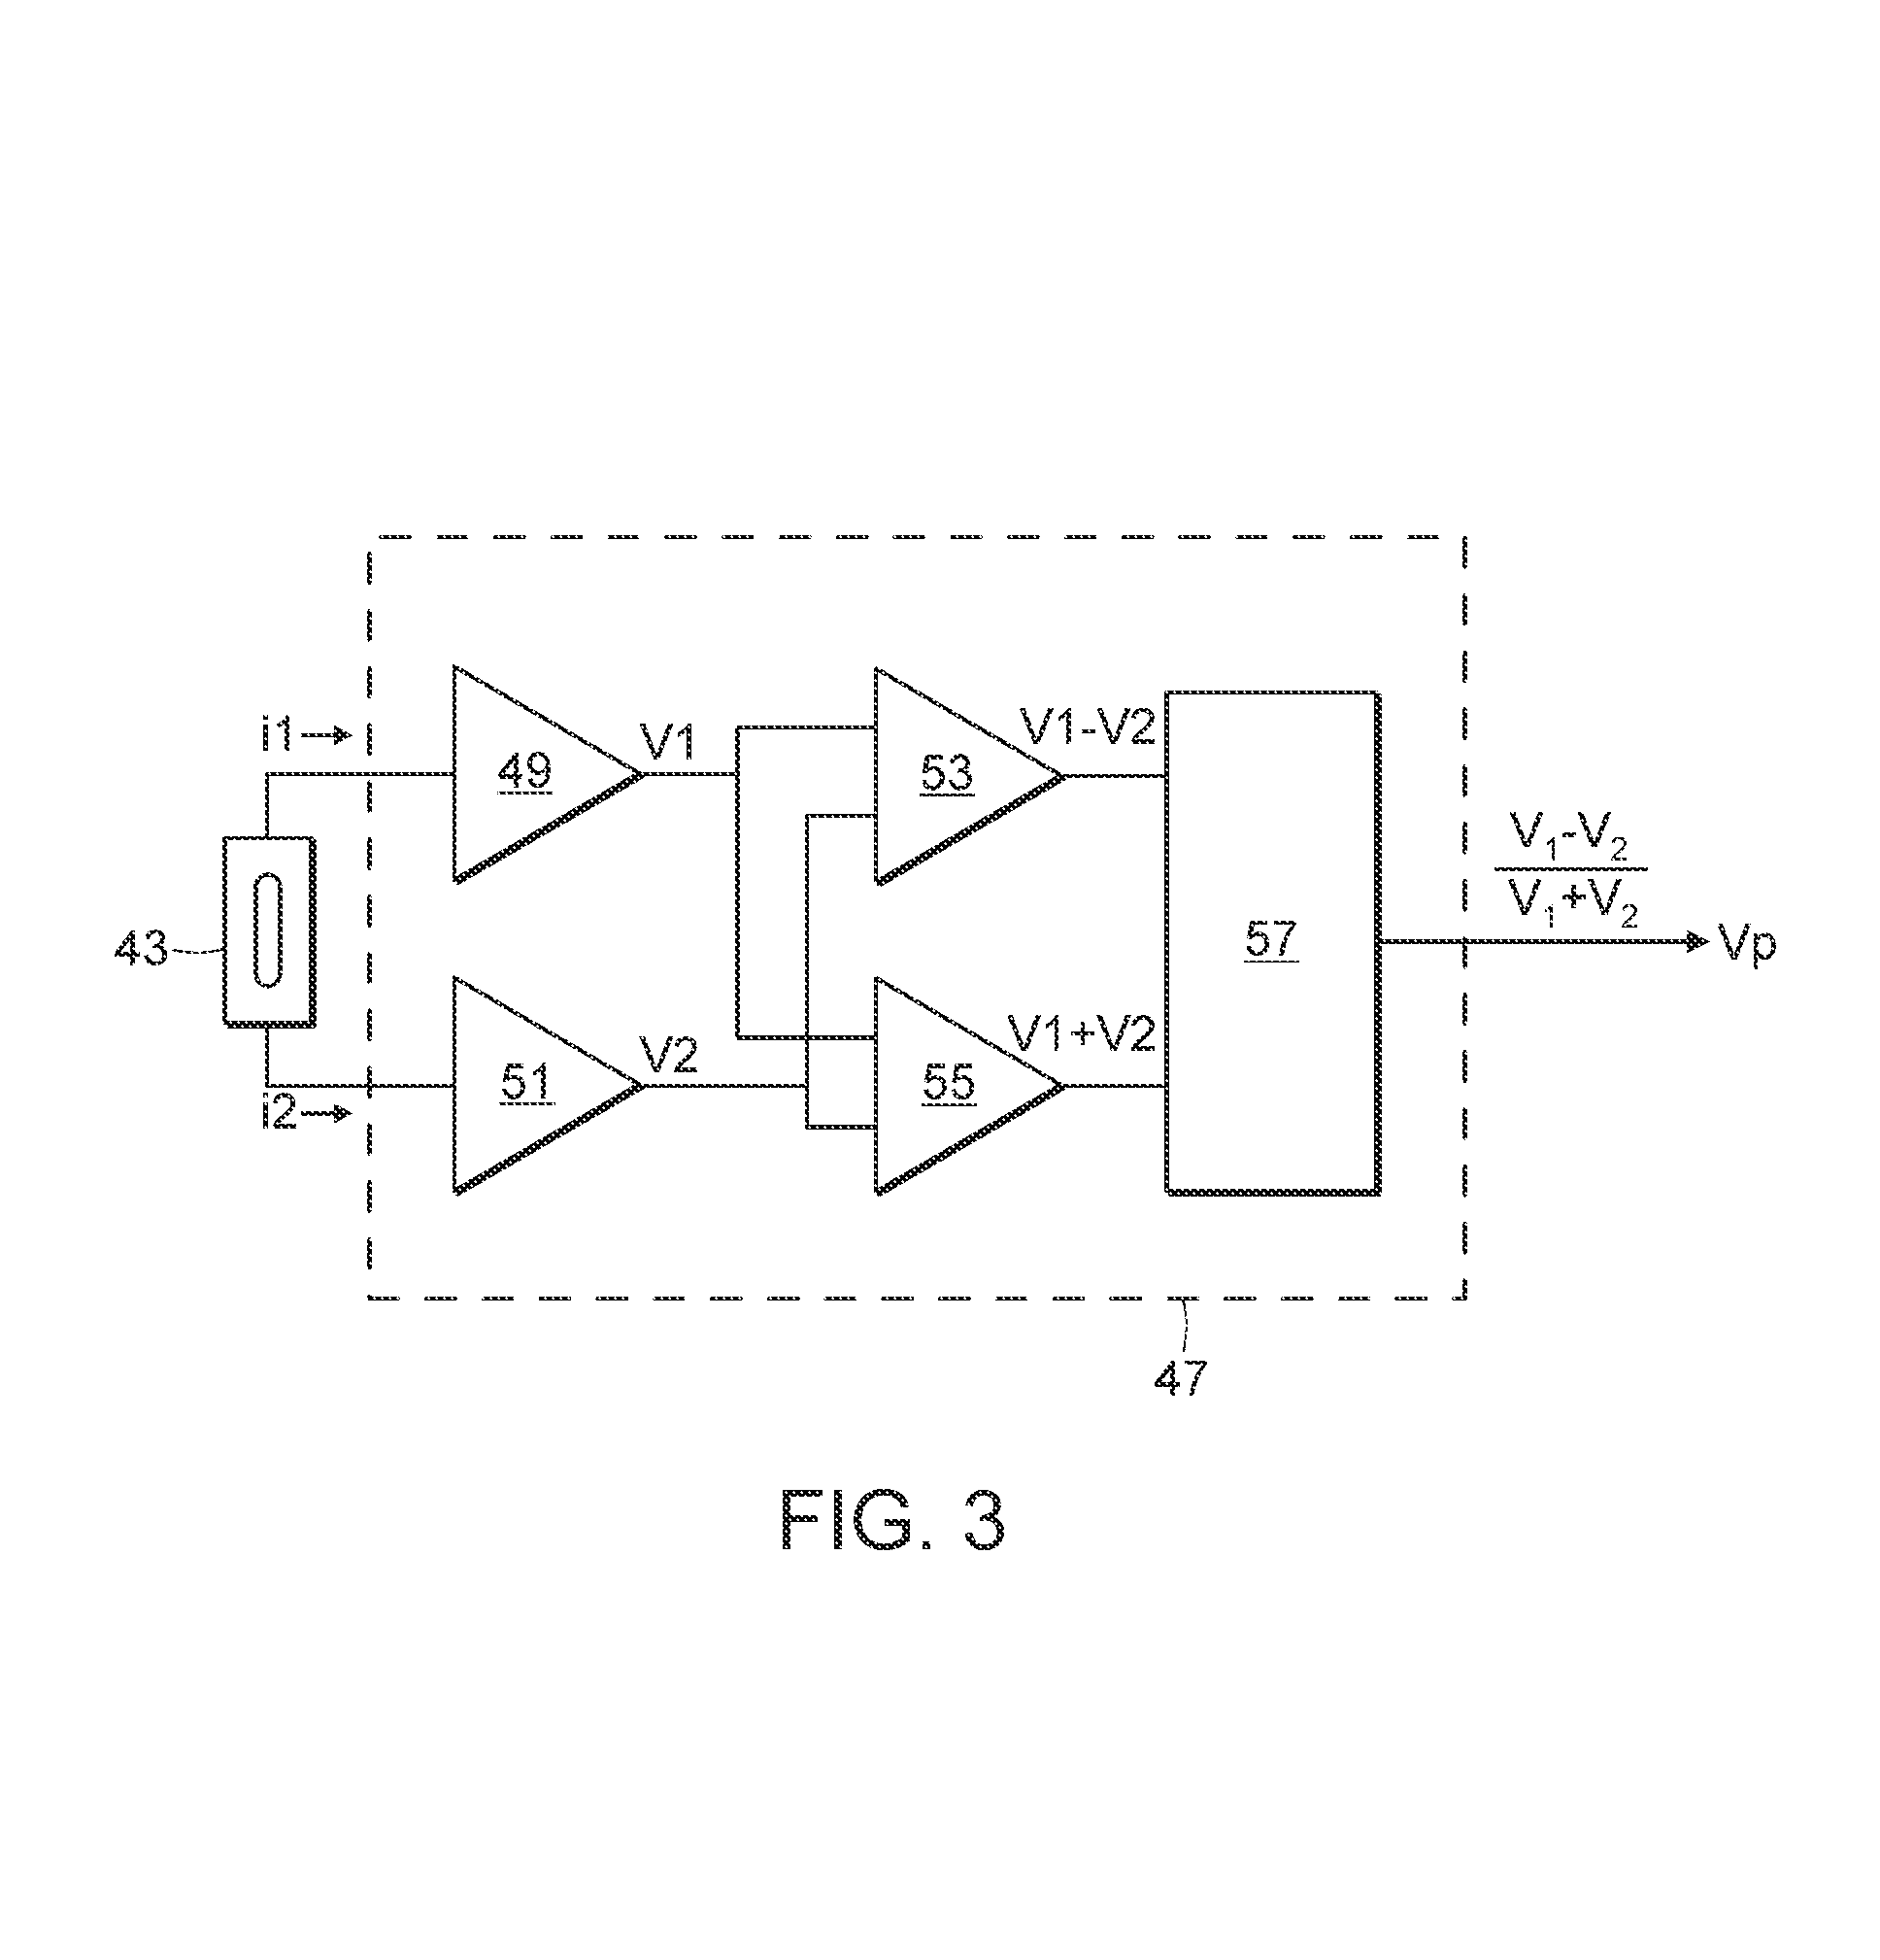 Method and apparatus for inspecting a semiconductor wafer